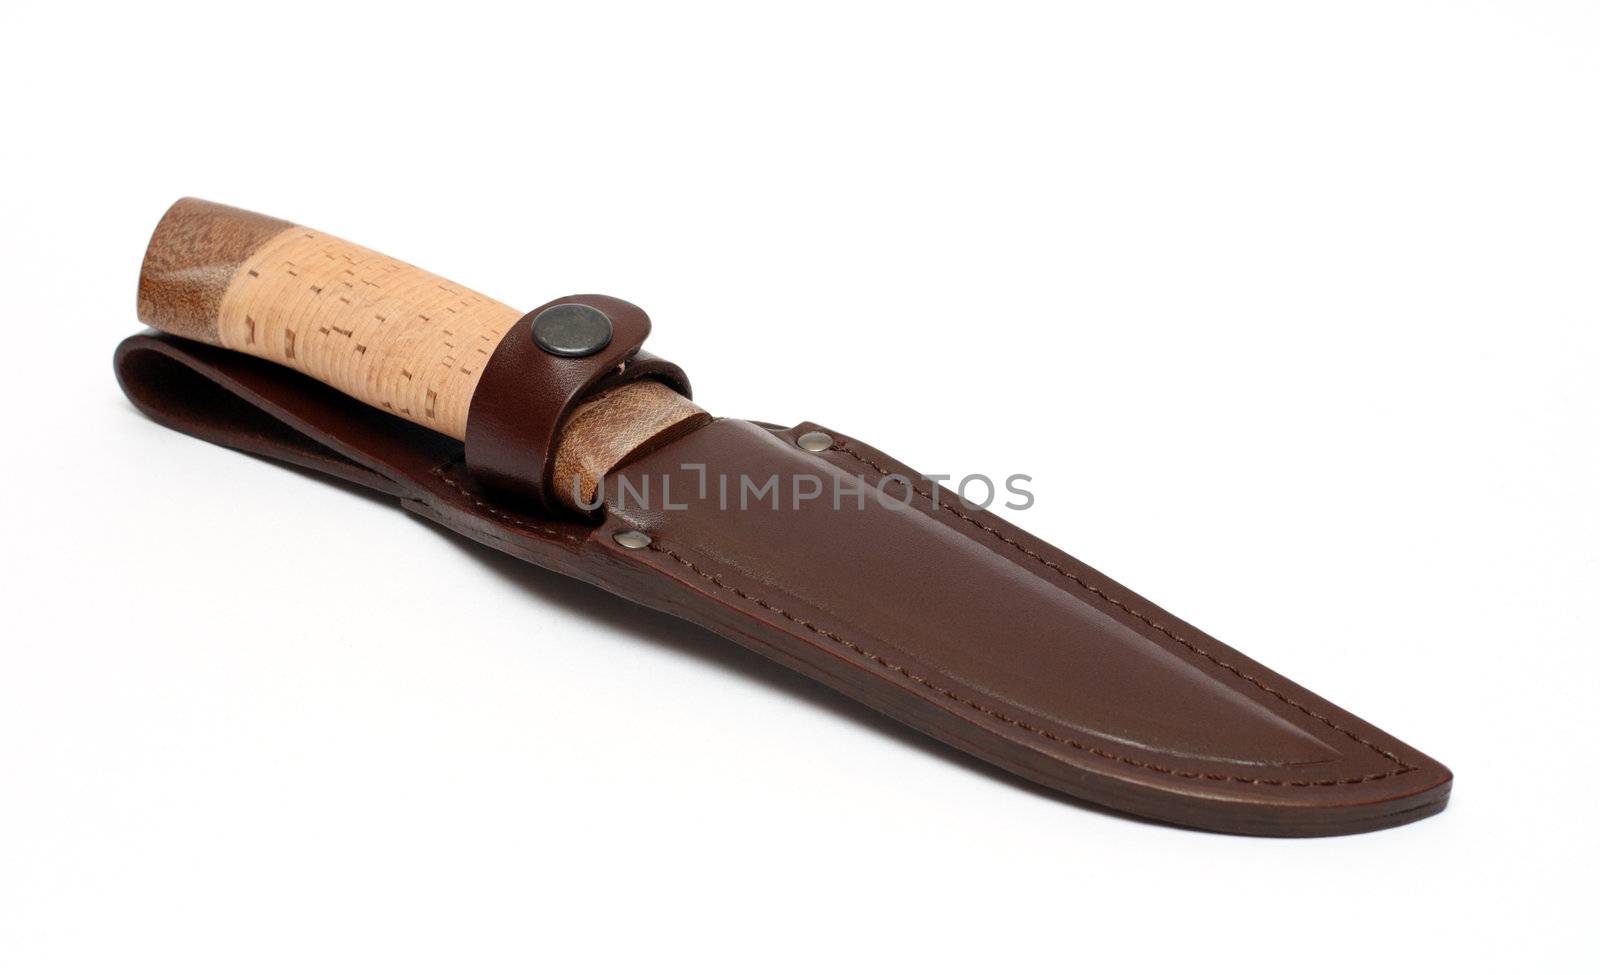 hunting knife in leather sheath by Mikko